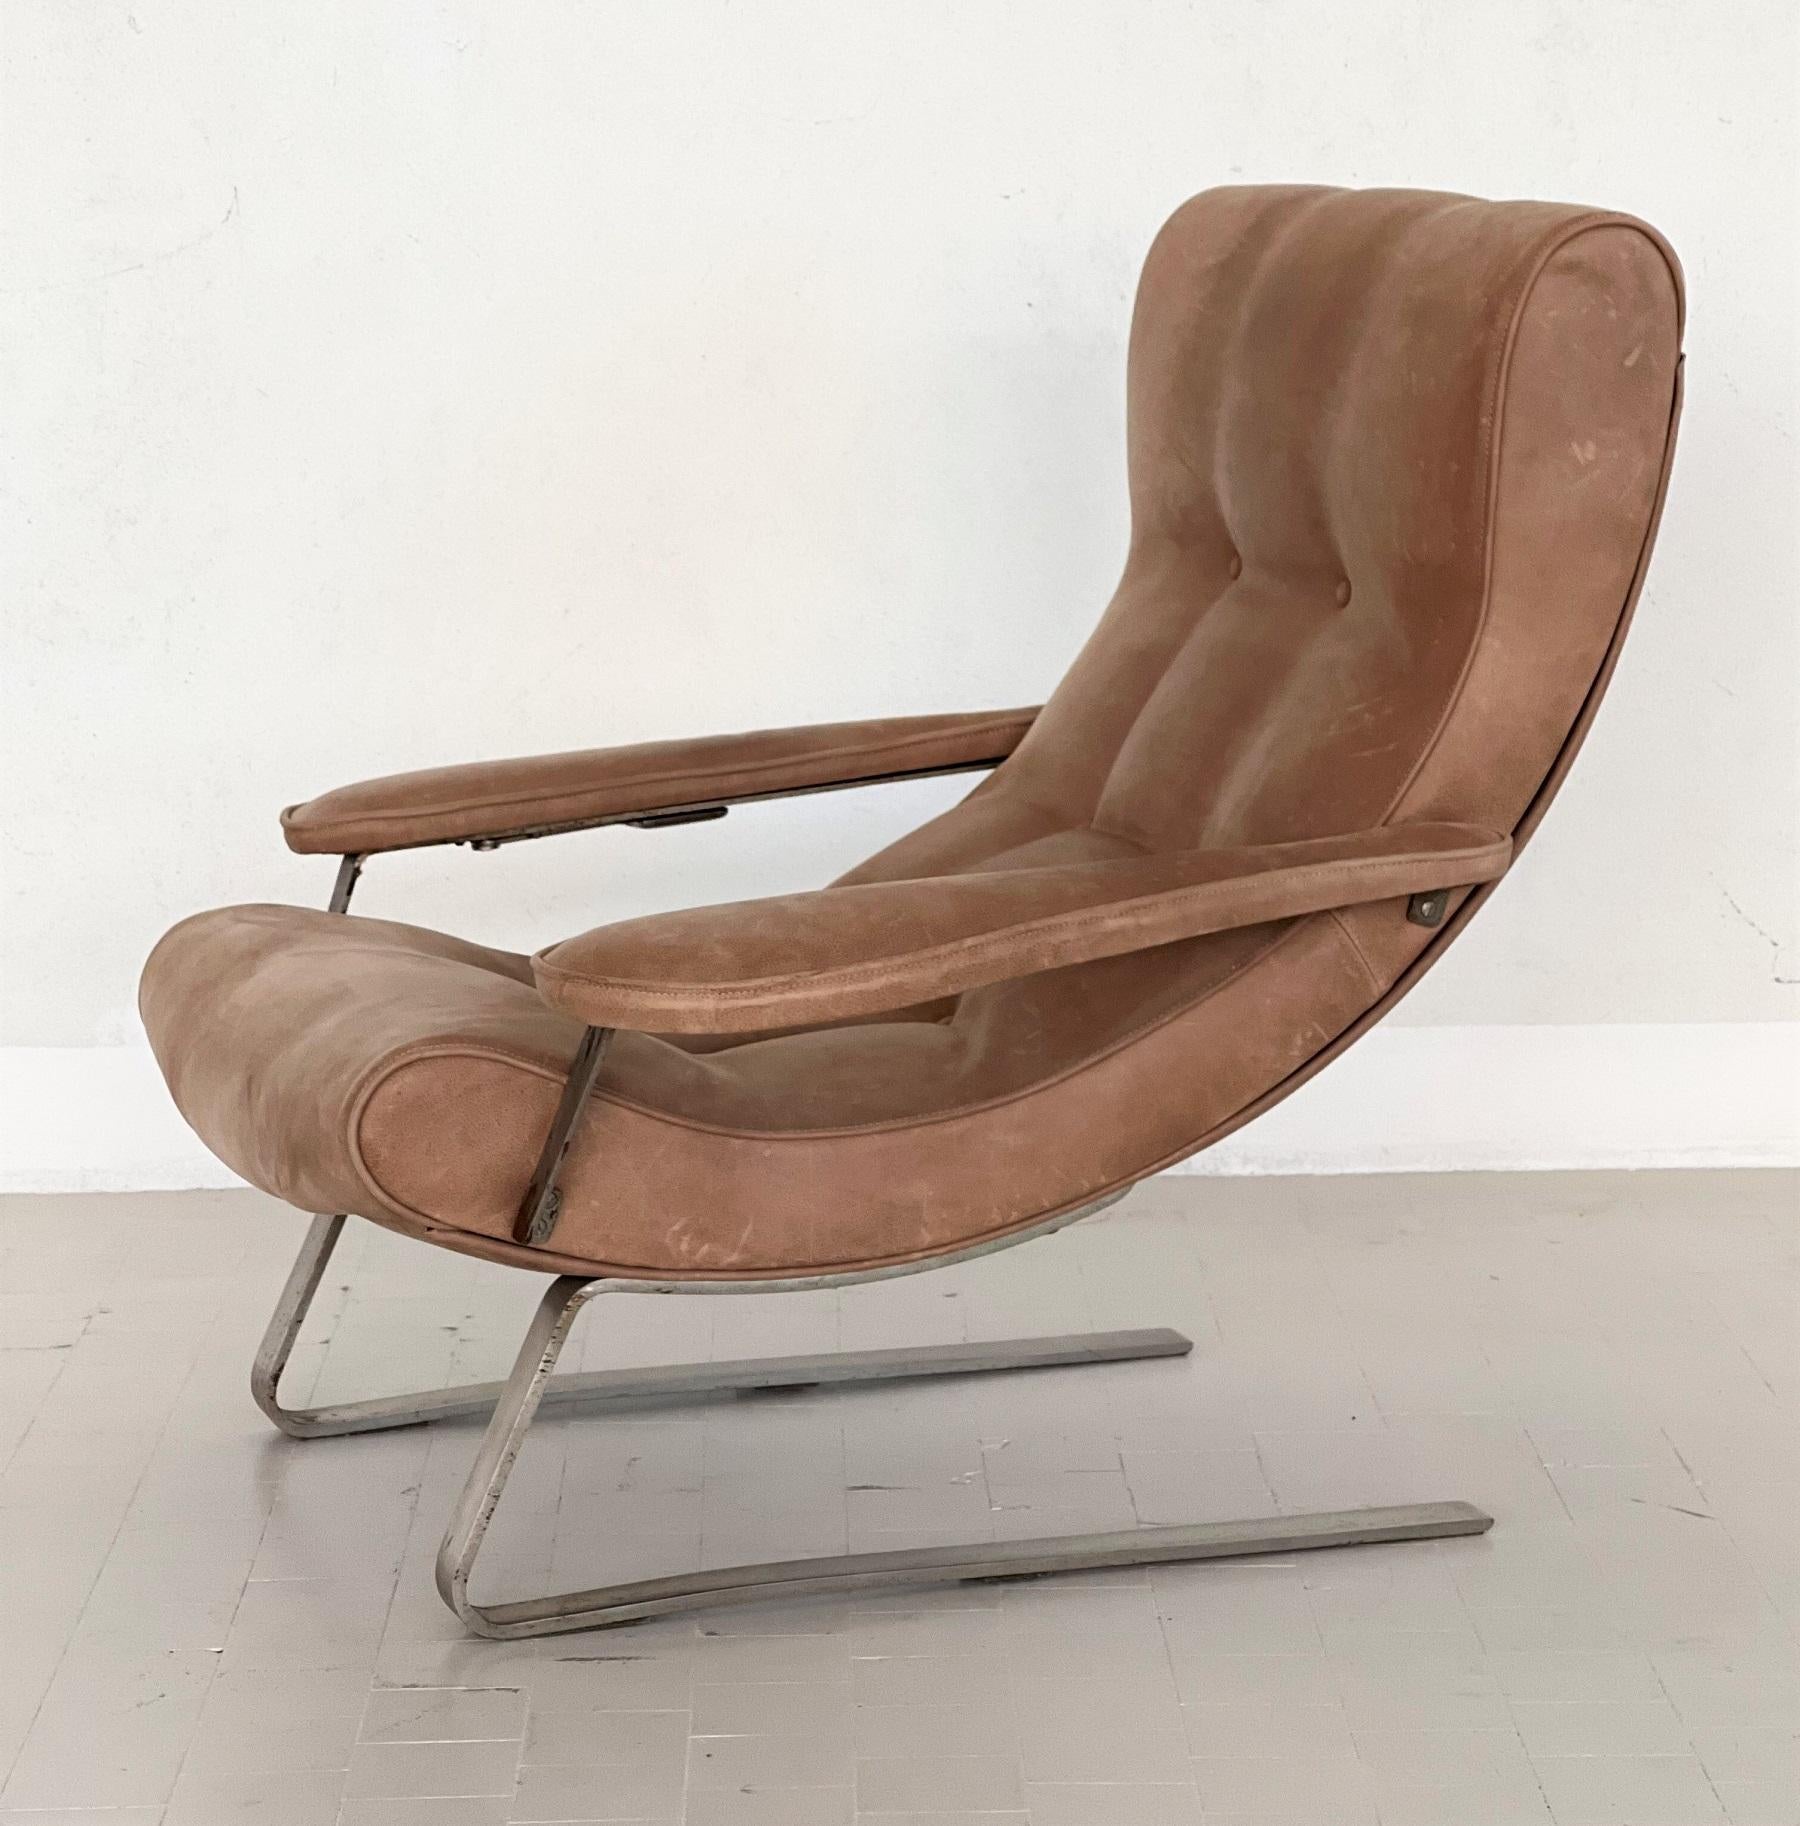 Late 20th Century Midcentury Lounge Chair in Suede by Guido Bonzani for Tecnosalotto, 1970s For Sale